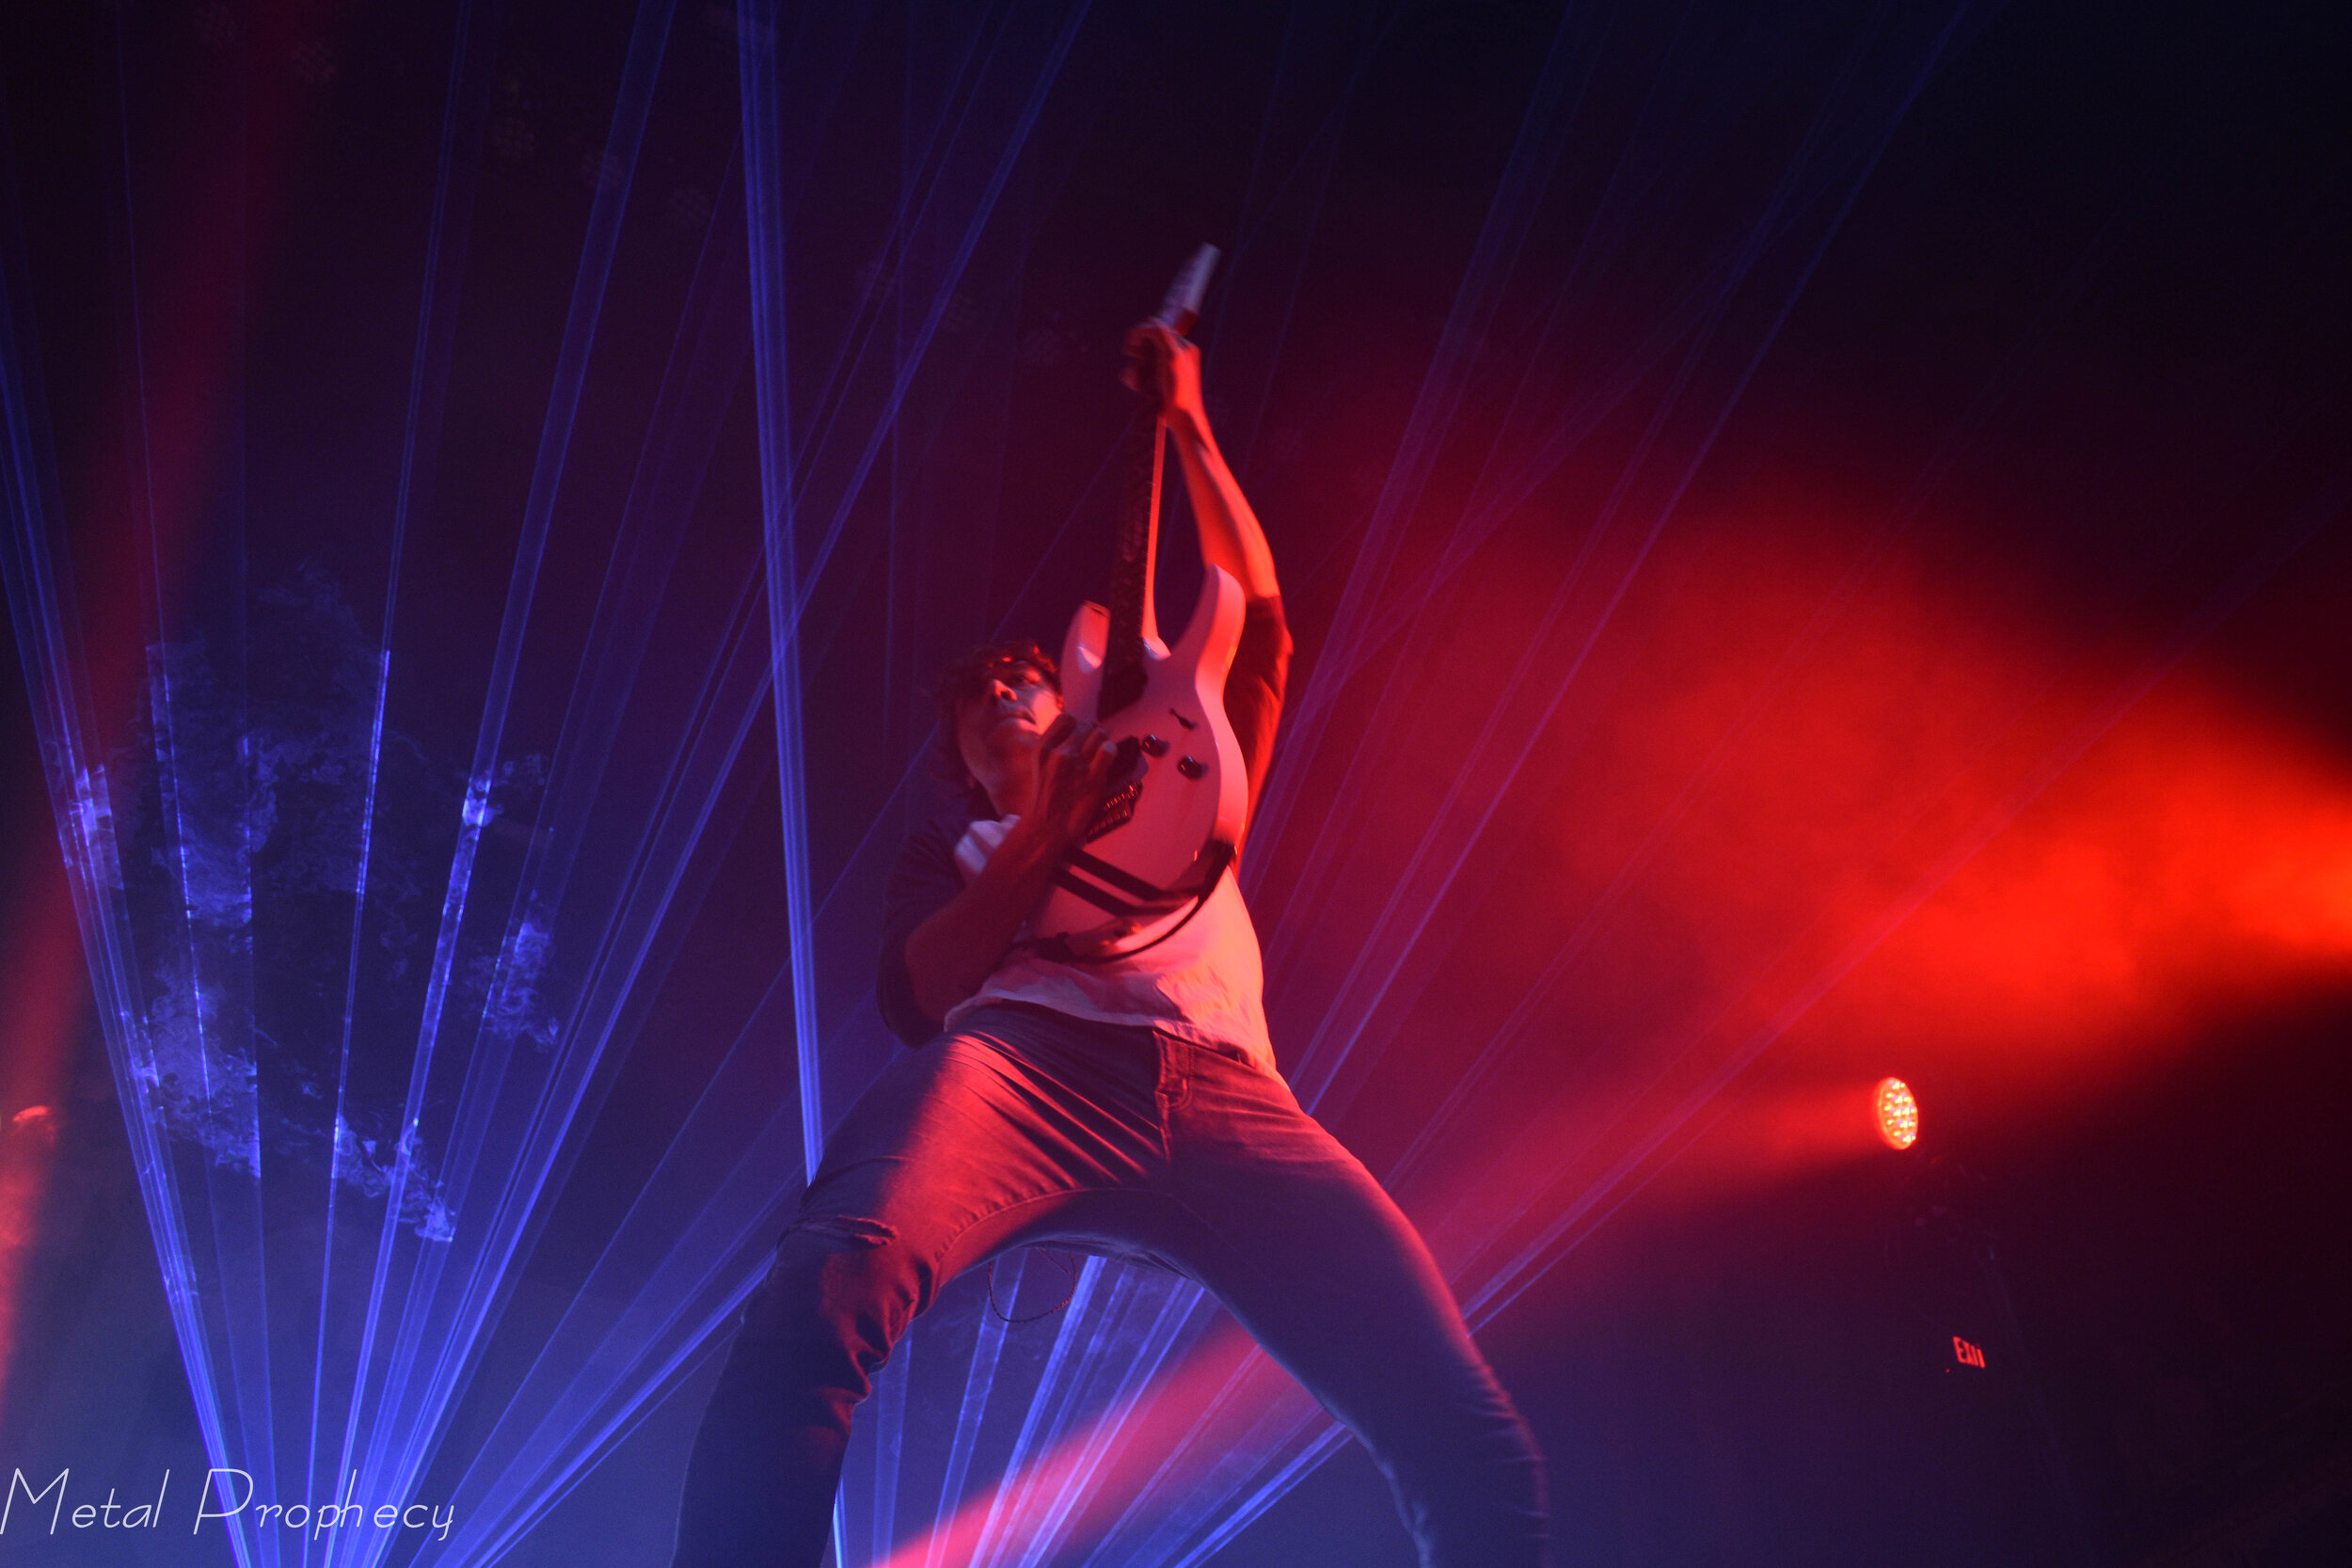 August Burns Red at The Tabernacle